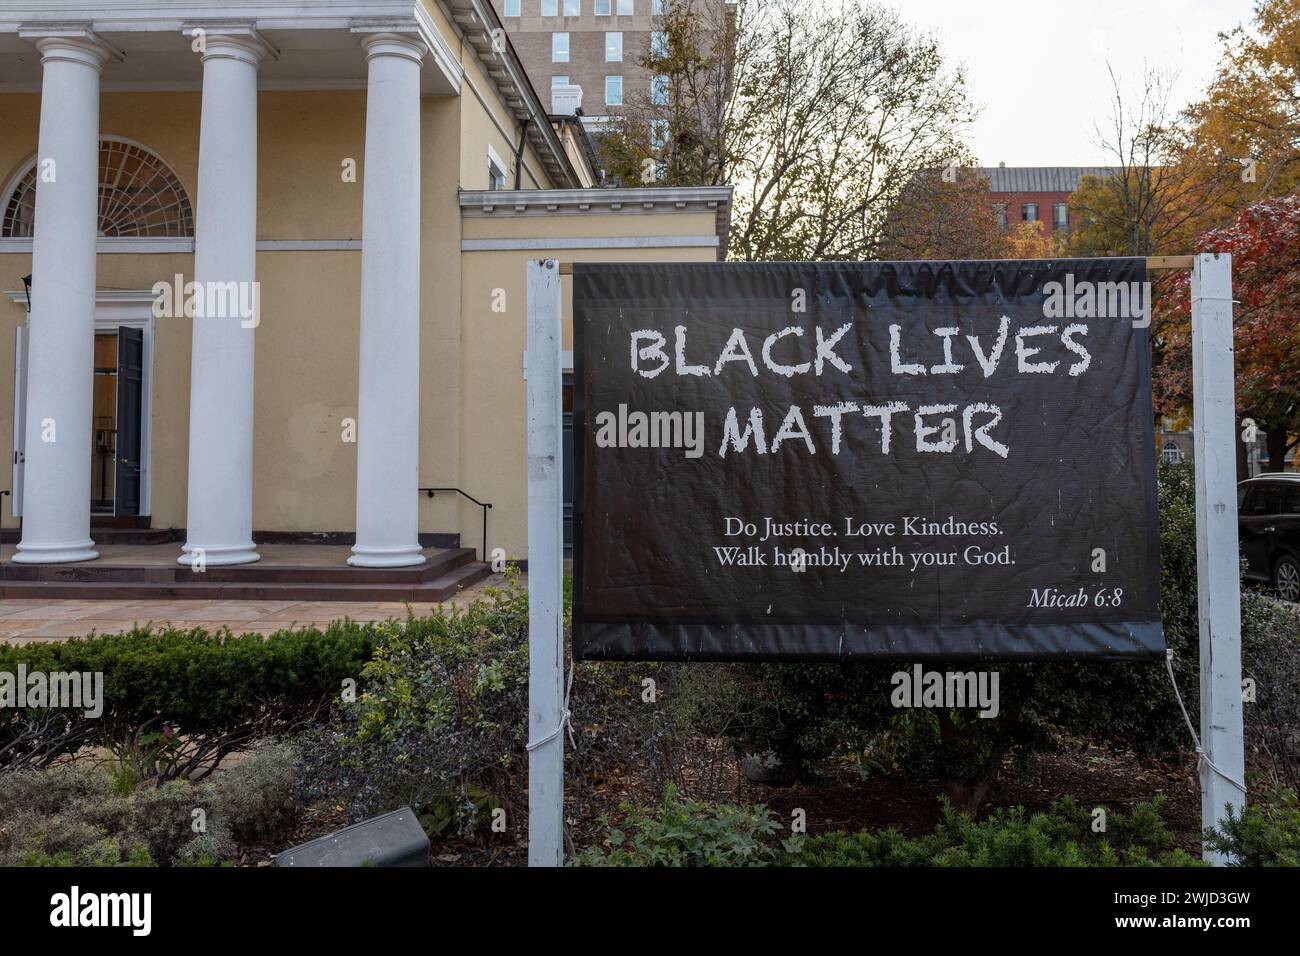 Black lives matter sign in front of church in Washington DC, USA Stock Photo